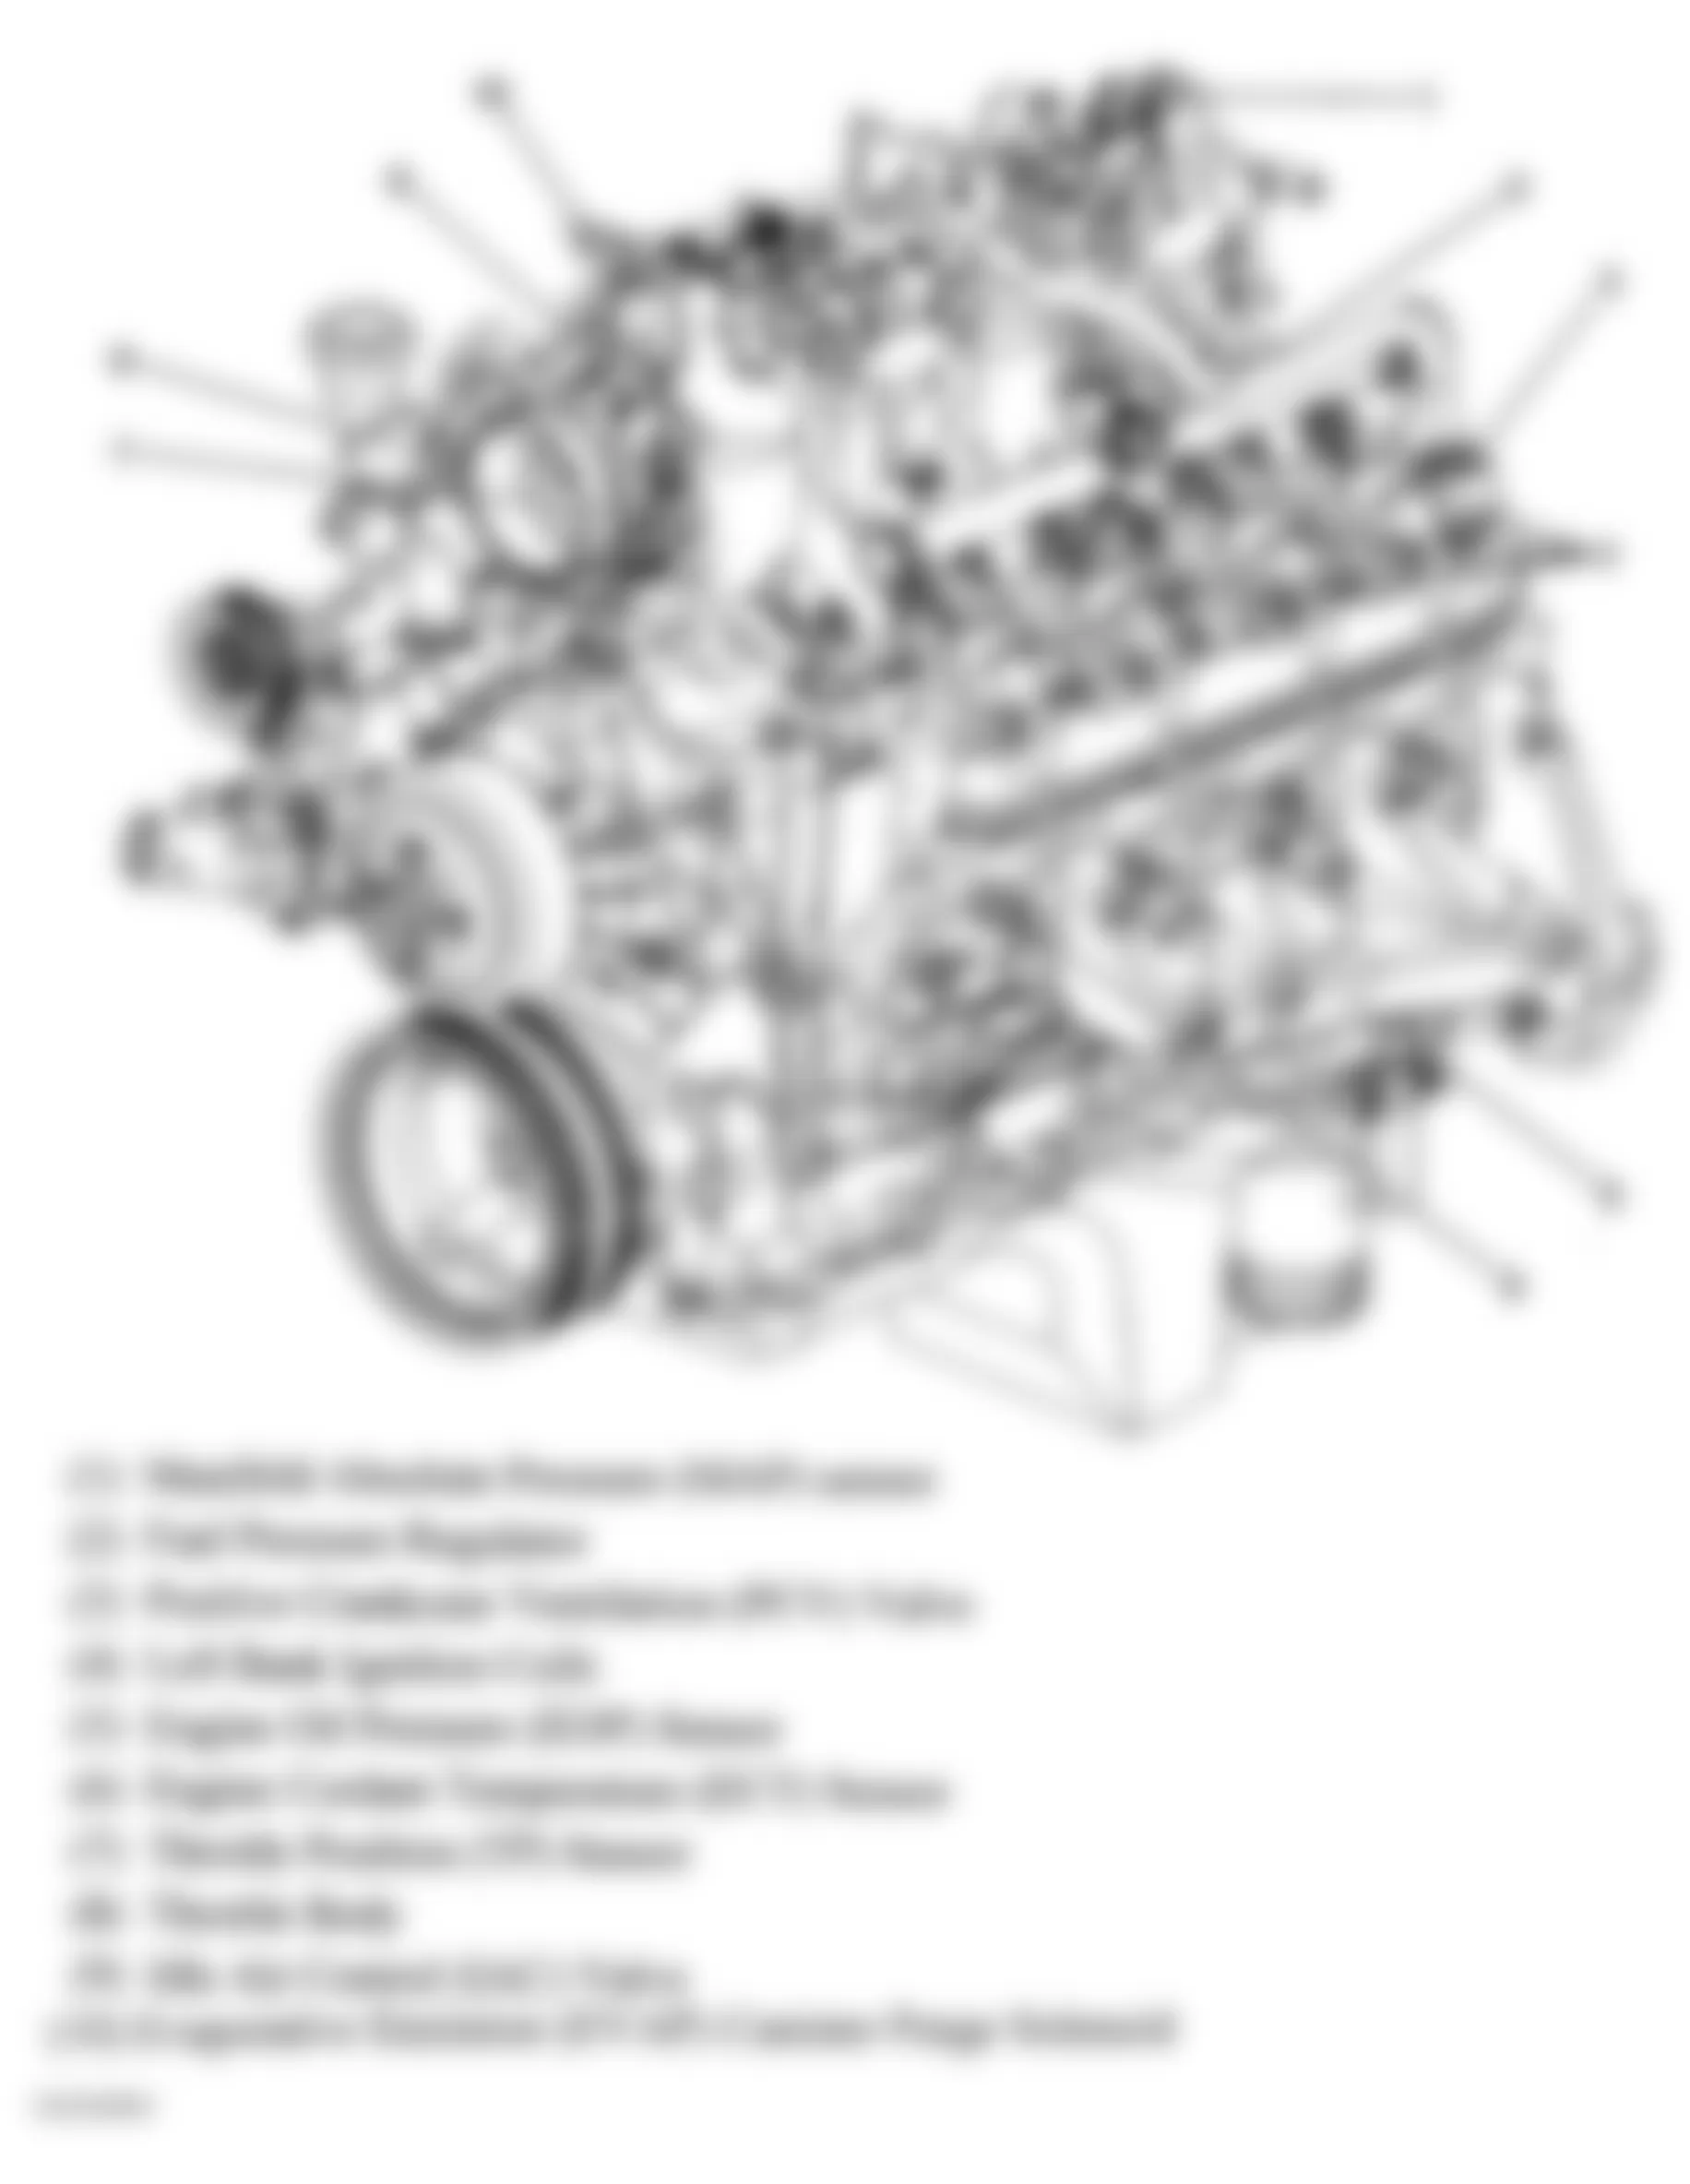 GMC Sierra 1500 HD 2006 - Component Locations -  Left Front Of Engine (4.8L, 5.3L & 6.0L)